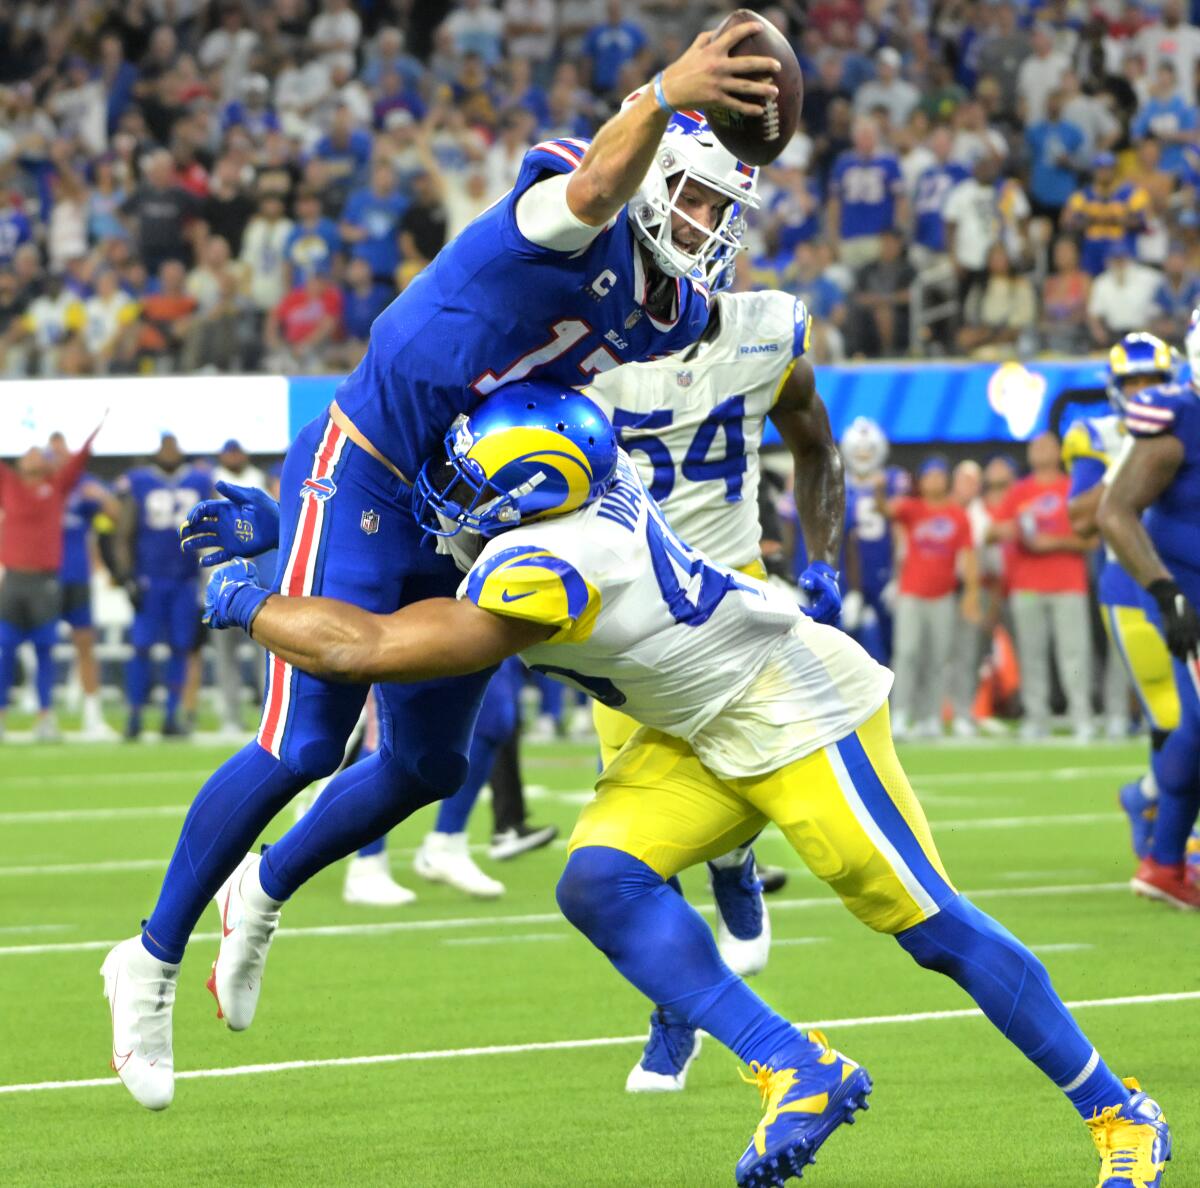 Bills quarterback Josh Allen leaps into the end zone for a touchdown as Rams linebacker Bobby Wagner tries to stop him.